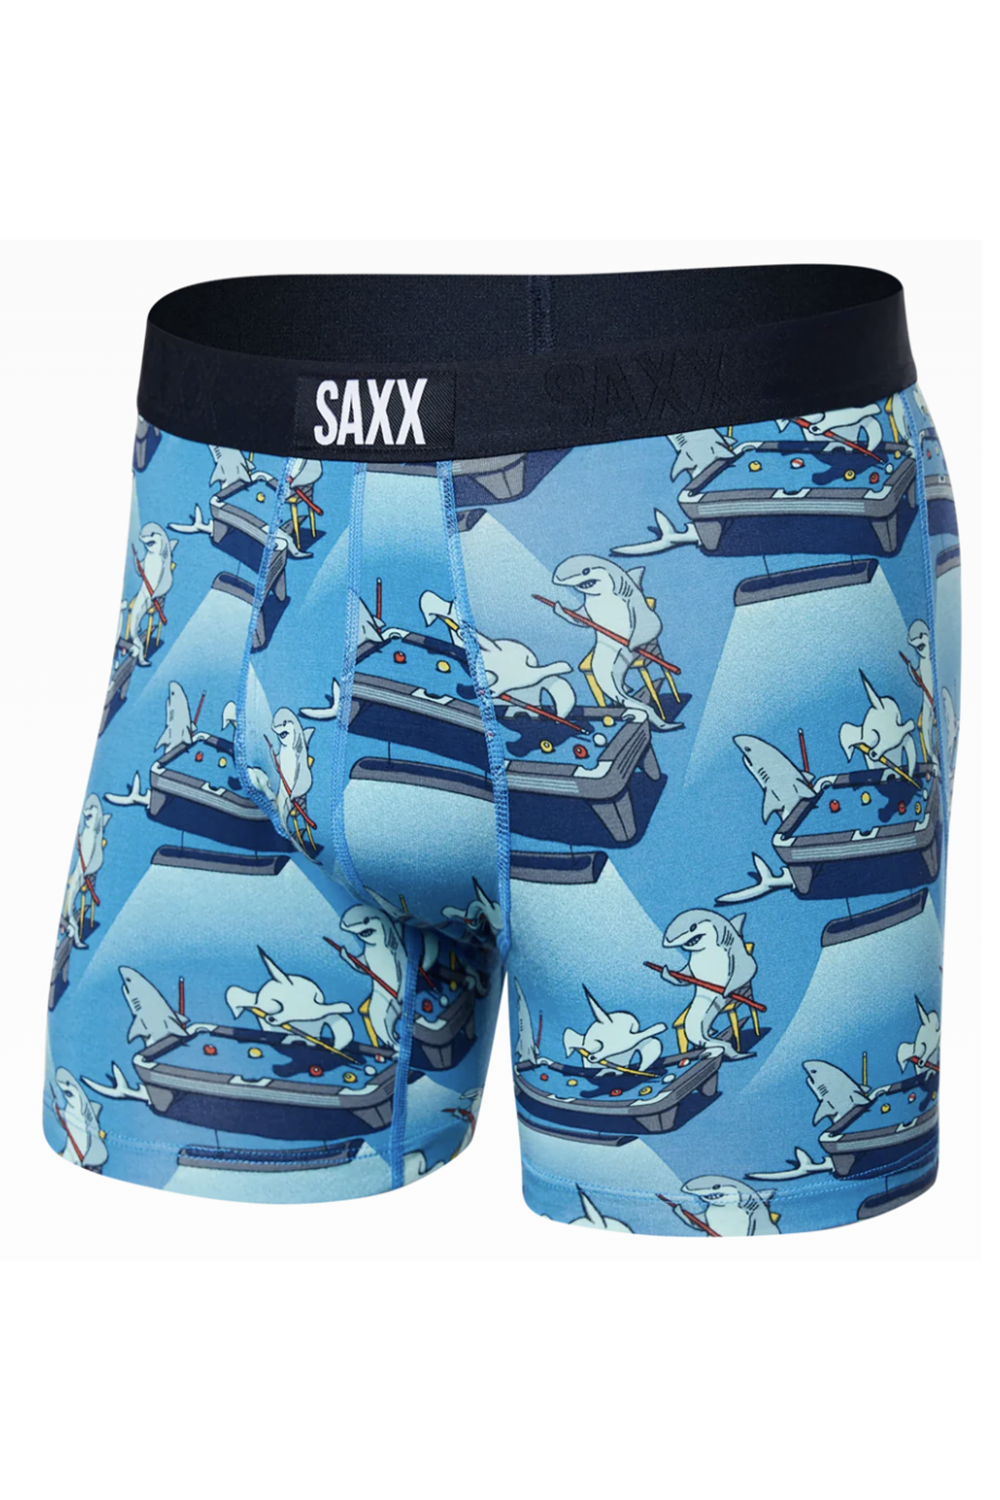 Ultra Boxer Brief - Pool Sharks / Blue